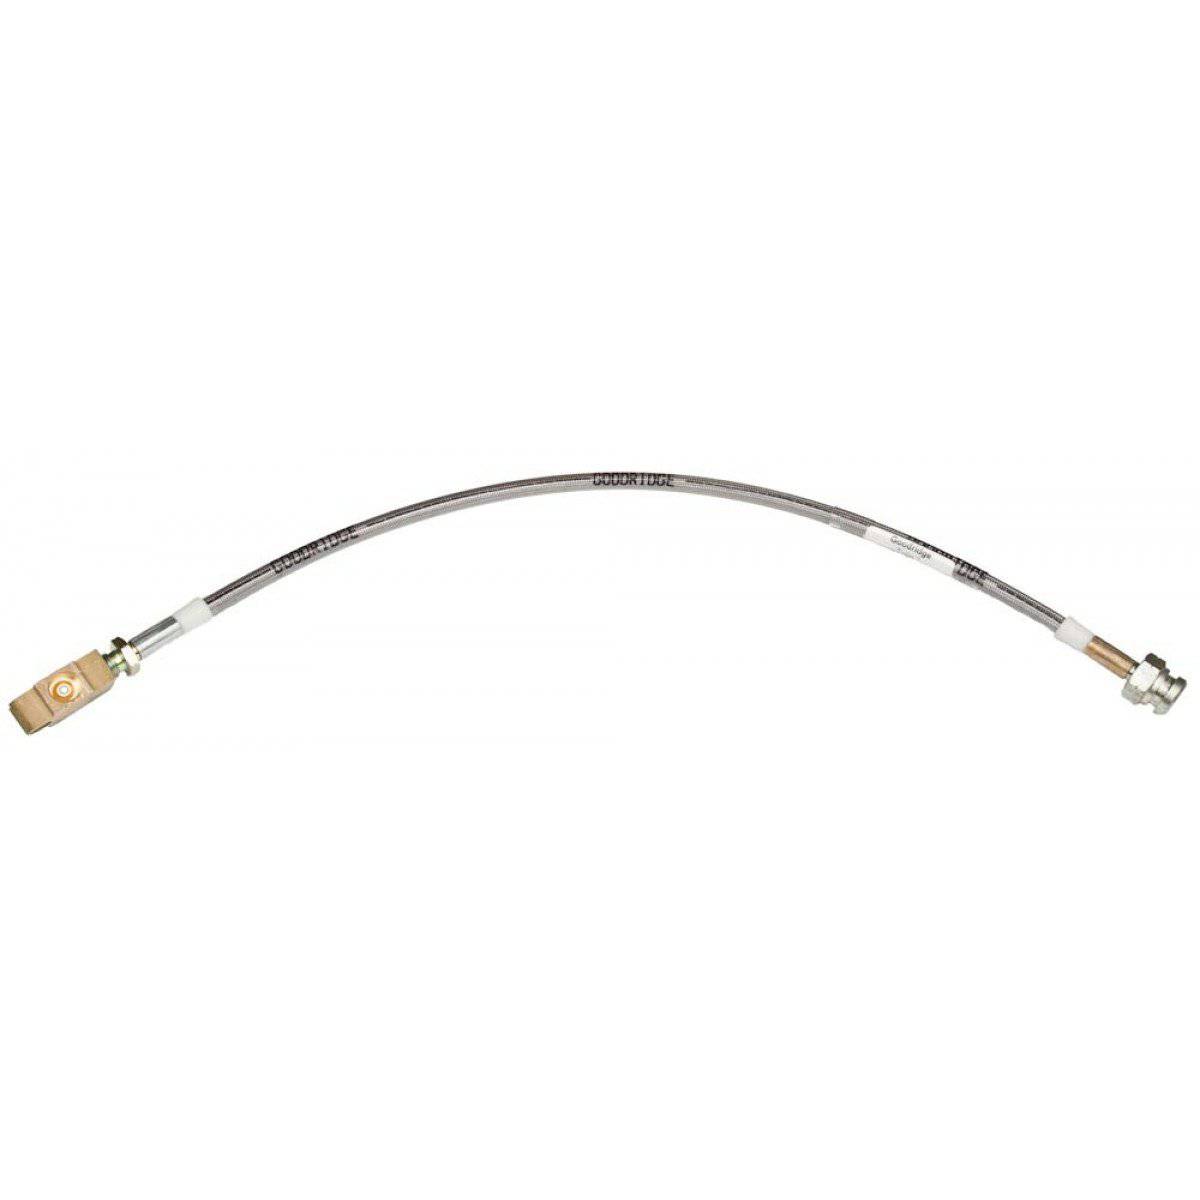 Braided Brake Line to suit GU Patrol w/ABS - Front Left Hand Centre | QIKAZZ 4x4 & Camping